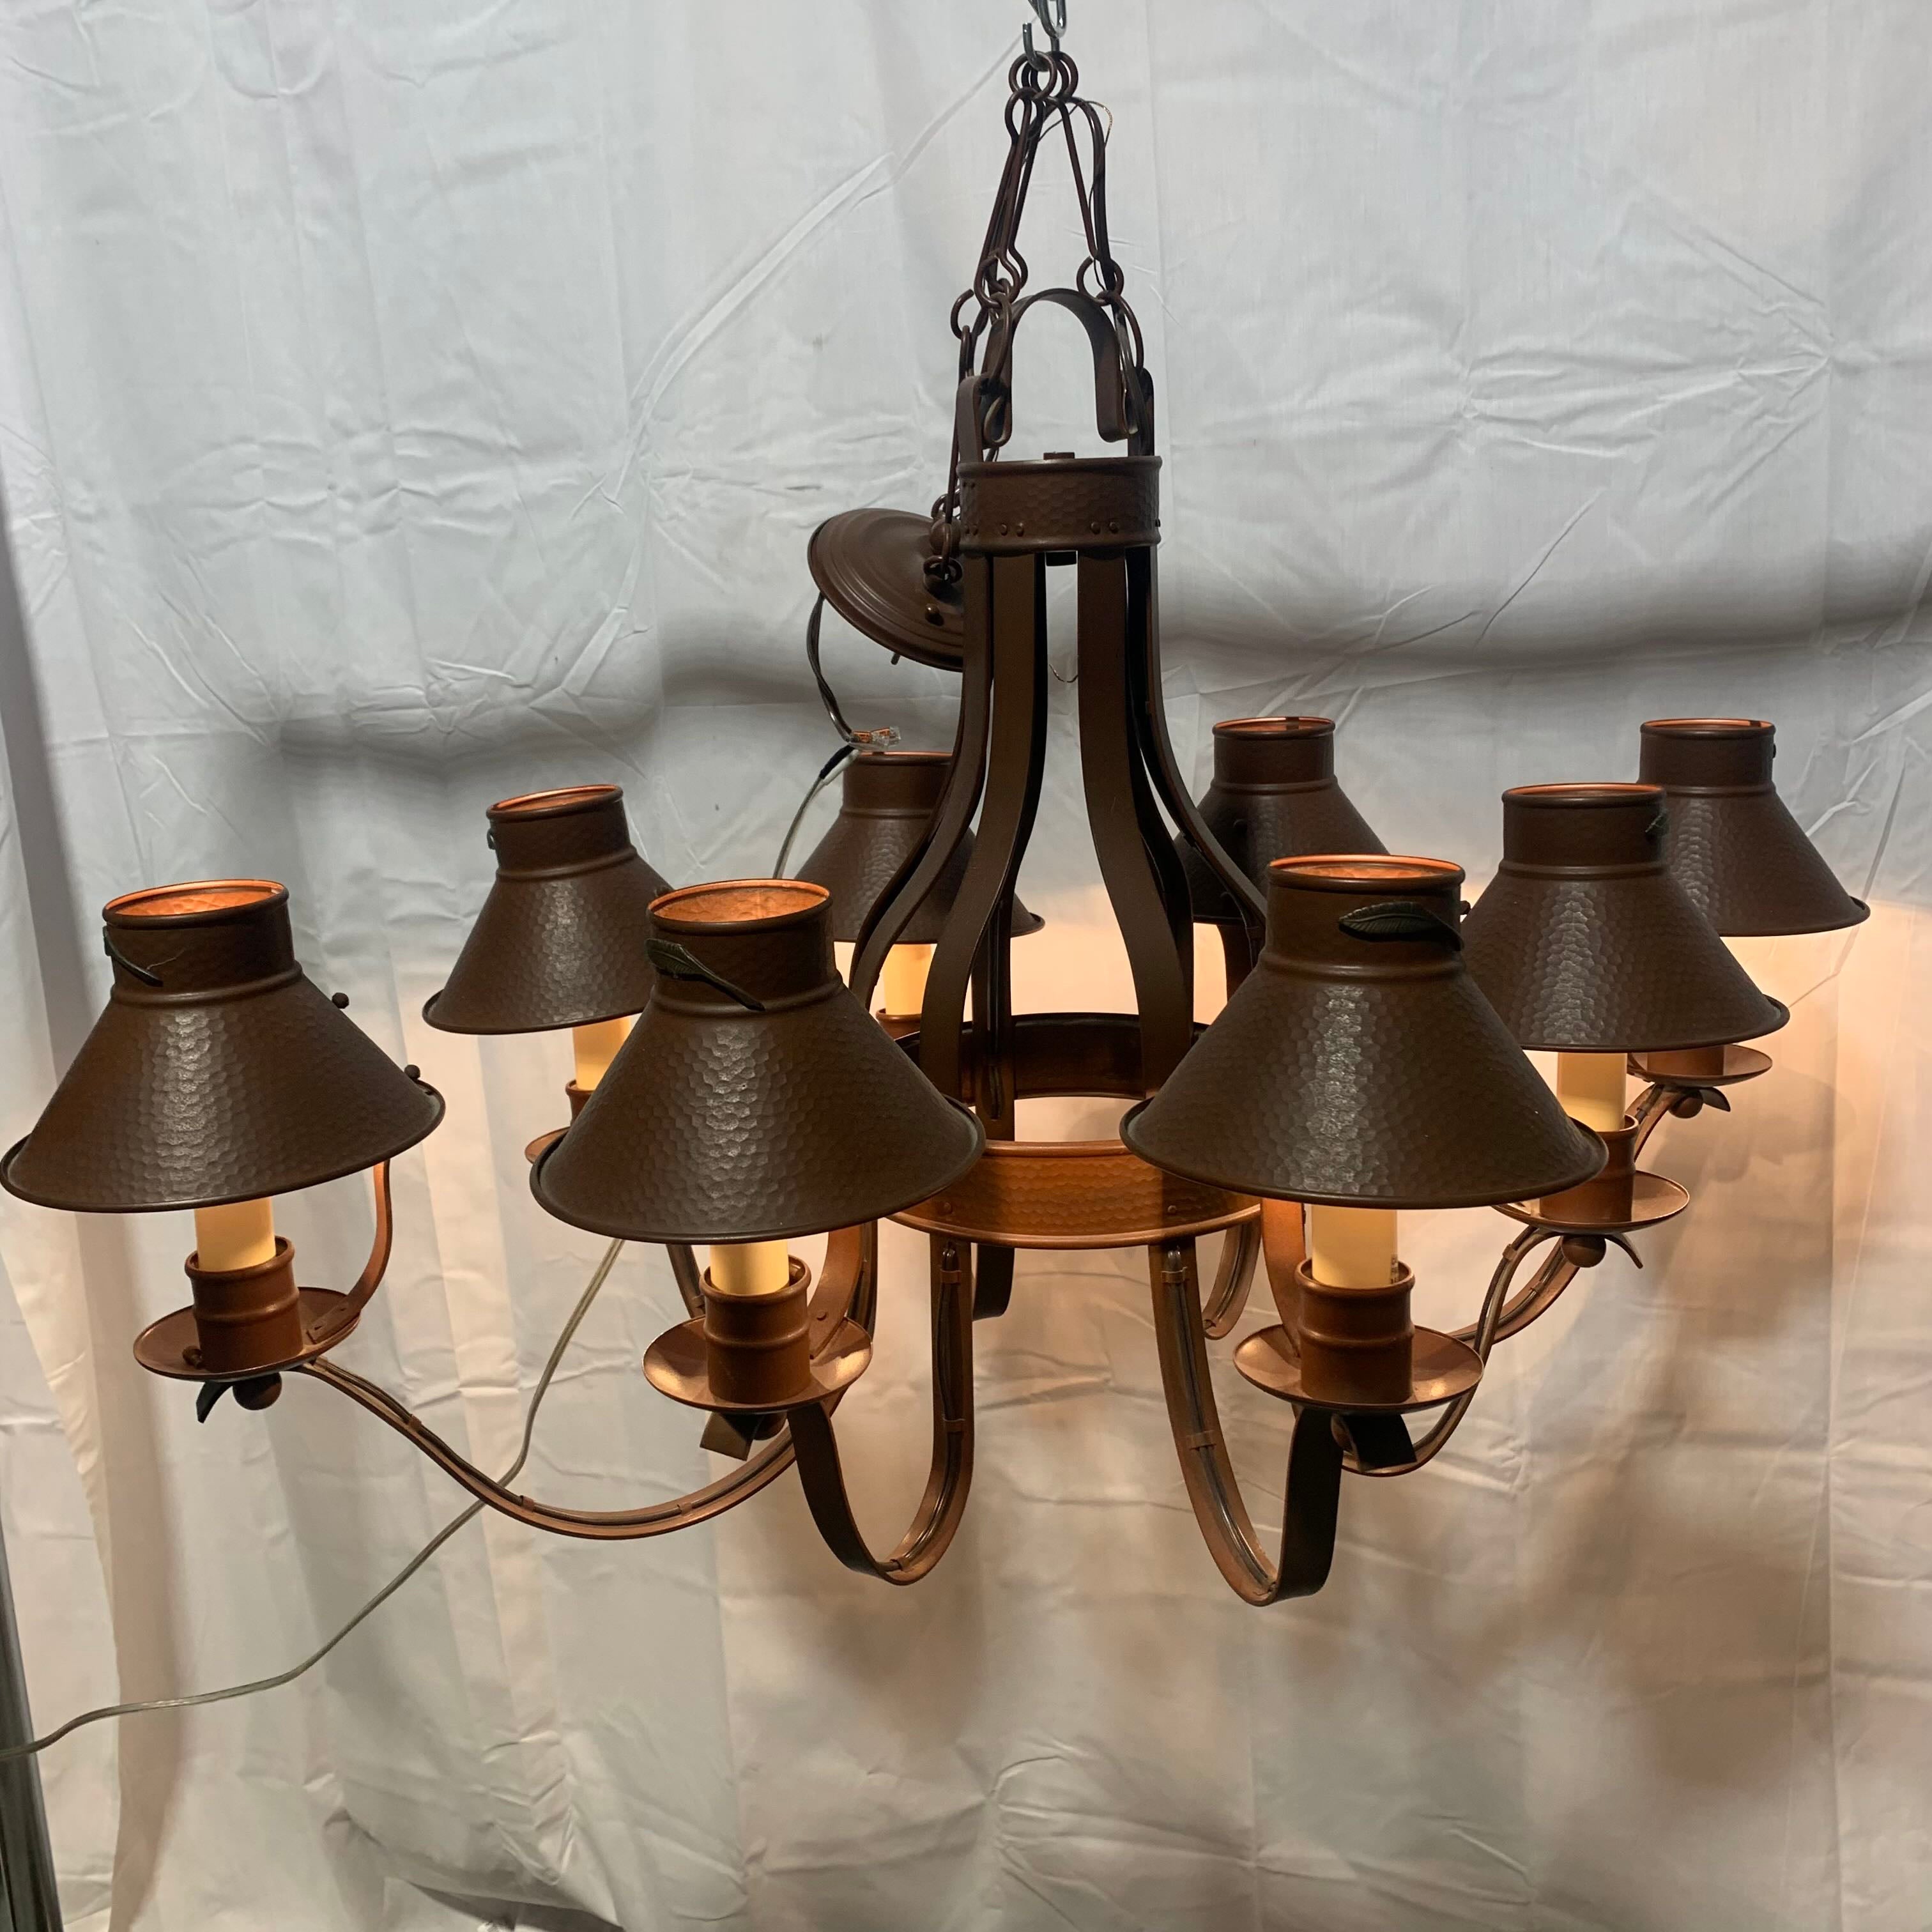 42"x 30"x 25" Lodge Style Hammered Metal Shades with Leaf Detail 8 Light Chandelier